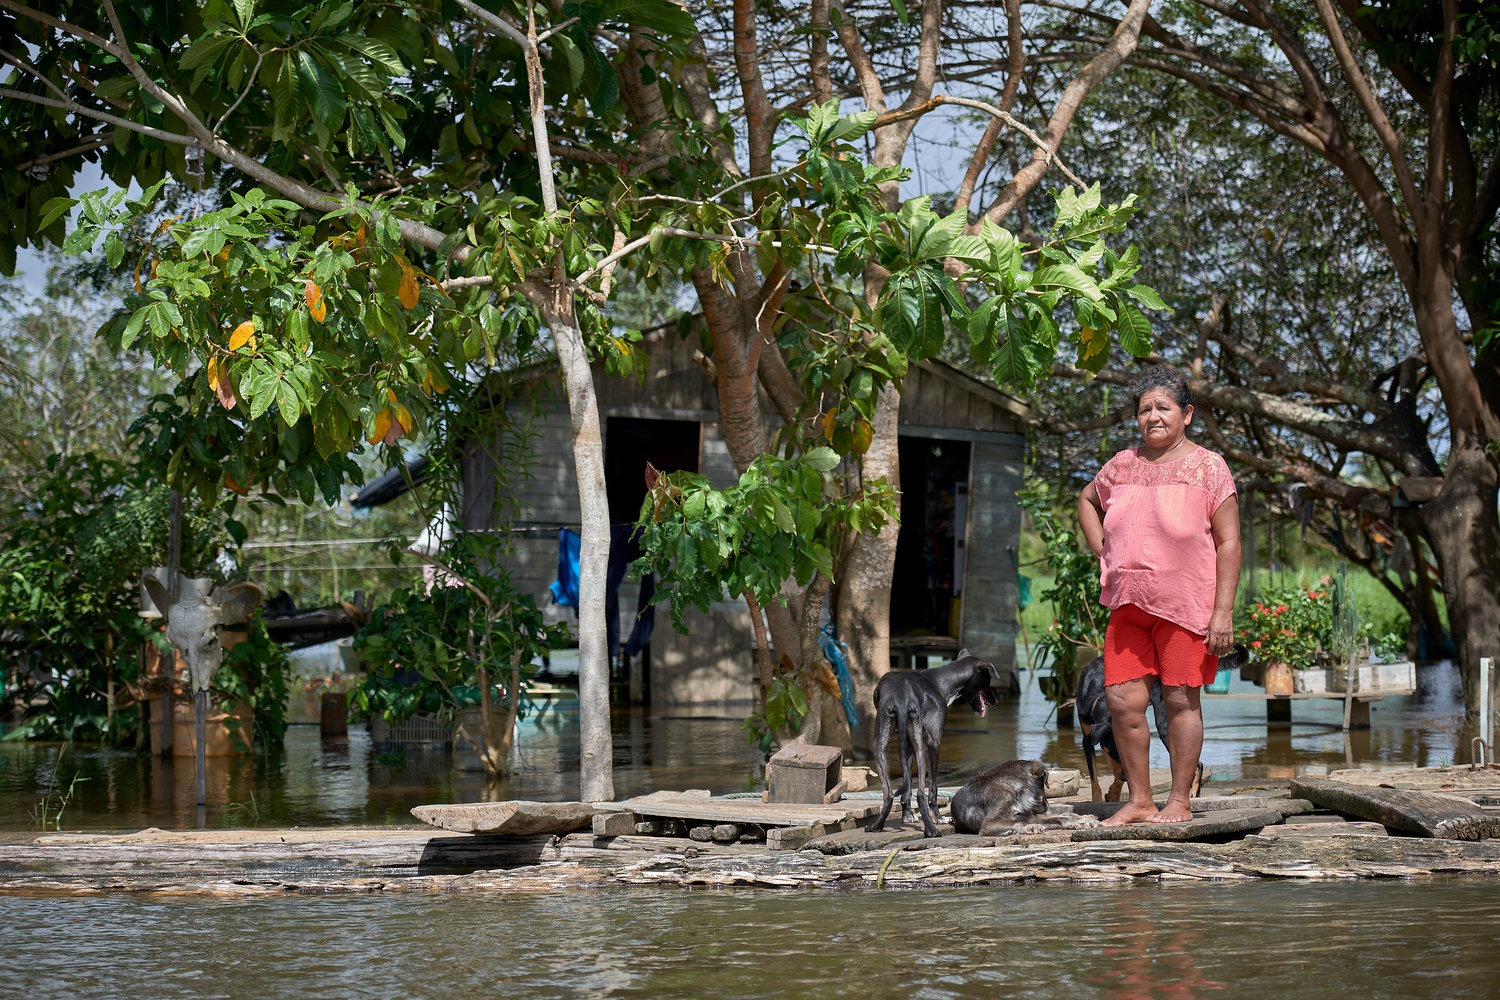 Juscelina Silva Batista, 54, stands in front of her house in the middle of the Amazon River near Santarem, Brazil, April 11, 2019. The Vatican released Pope Francis' postsynodal apostolic exhortation, "Querida Amazonia"